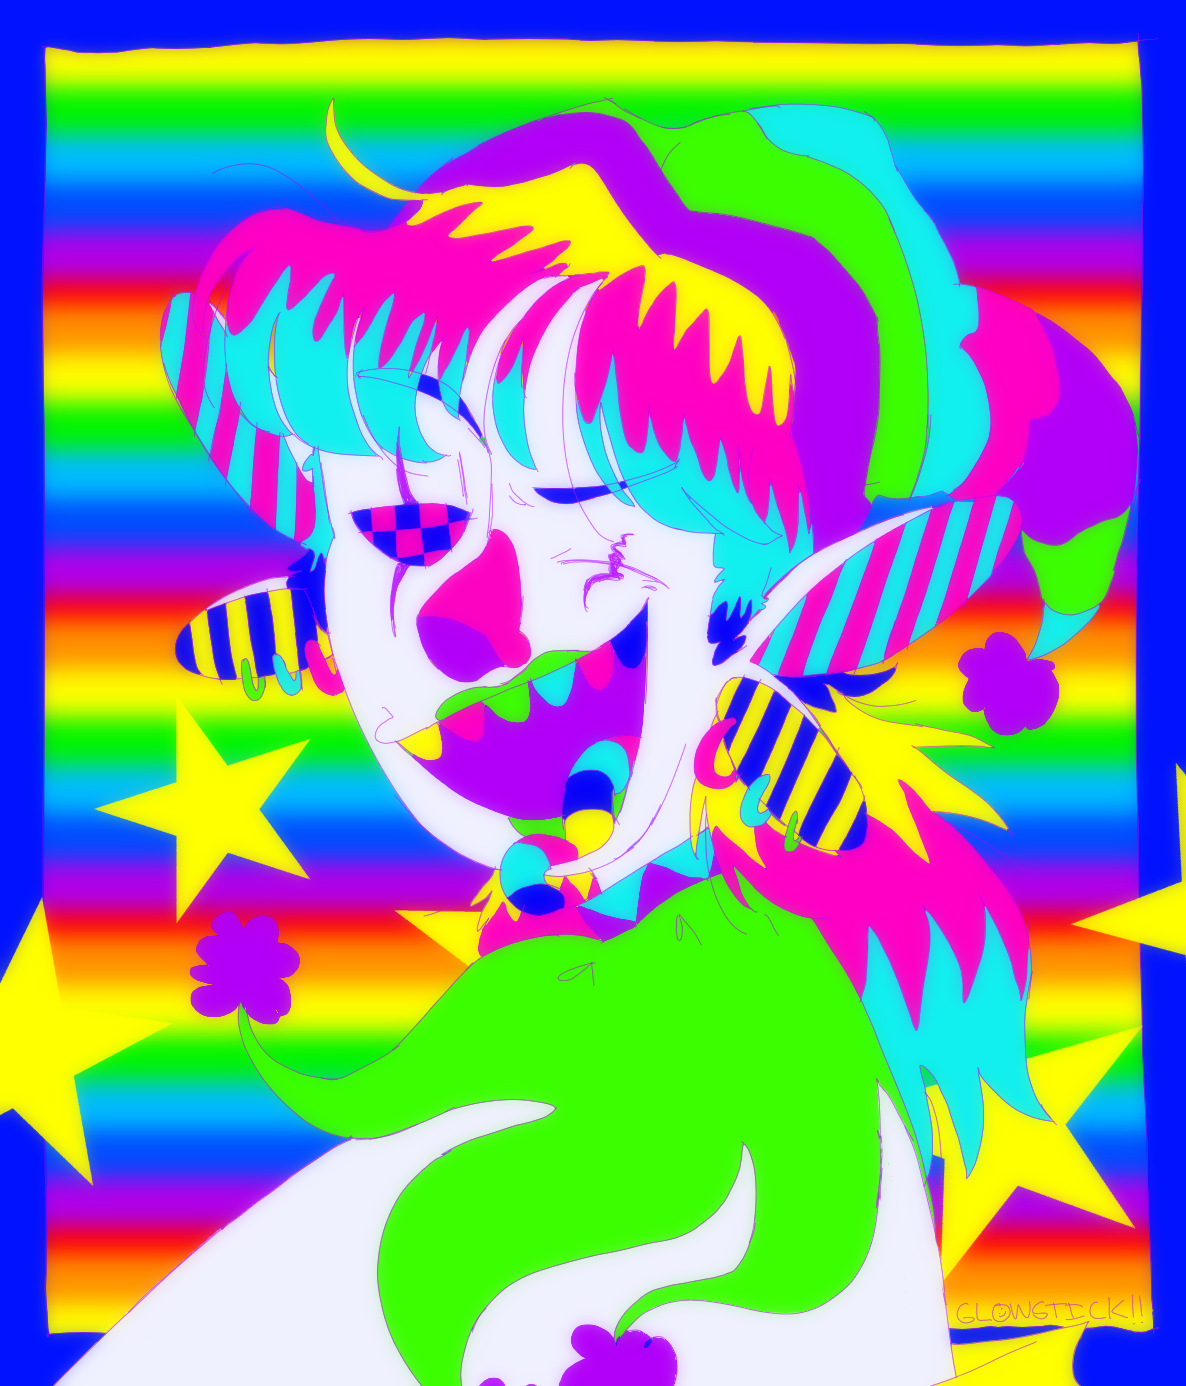 A brightly colored drawing of a clown oc. They have rainbow hair and are winking at the camera. Instead of their open eye having a pupil and sclera, there is only a blue and magenta checker pattern in its place.